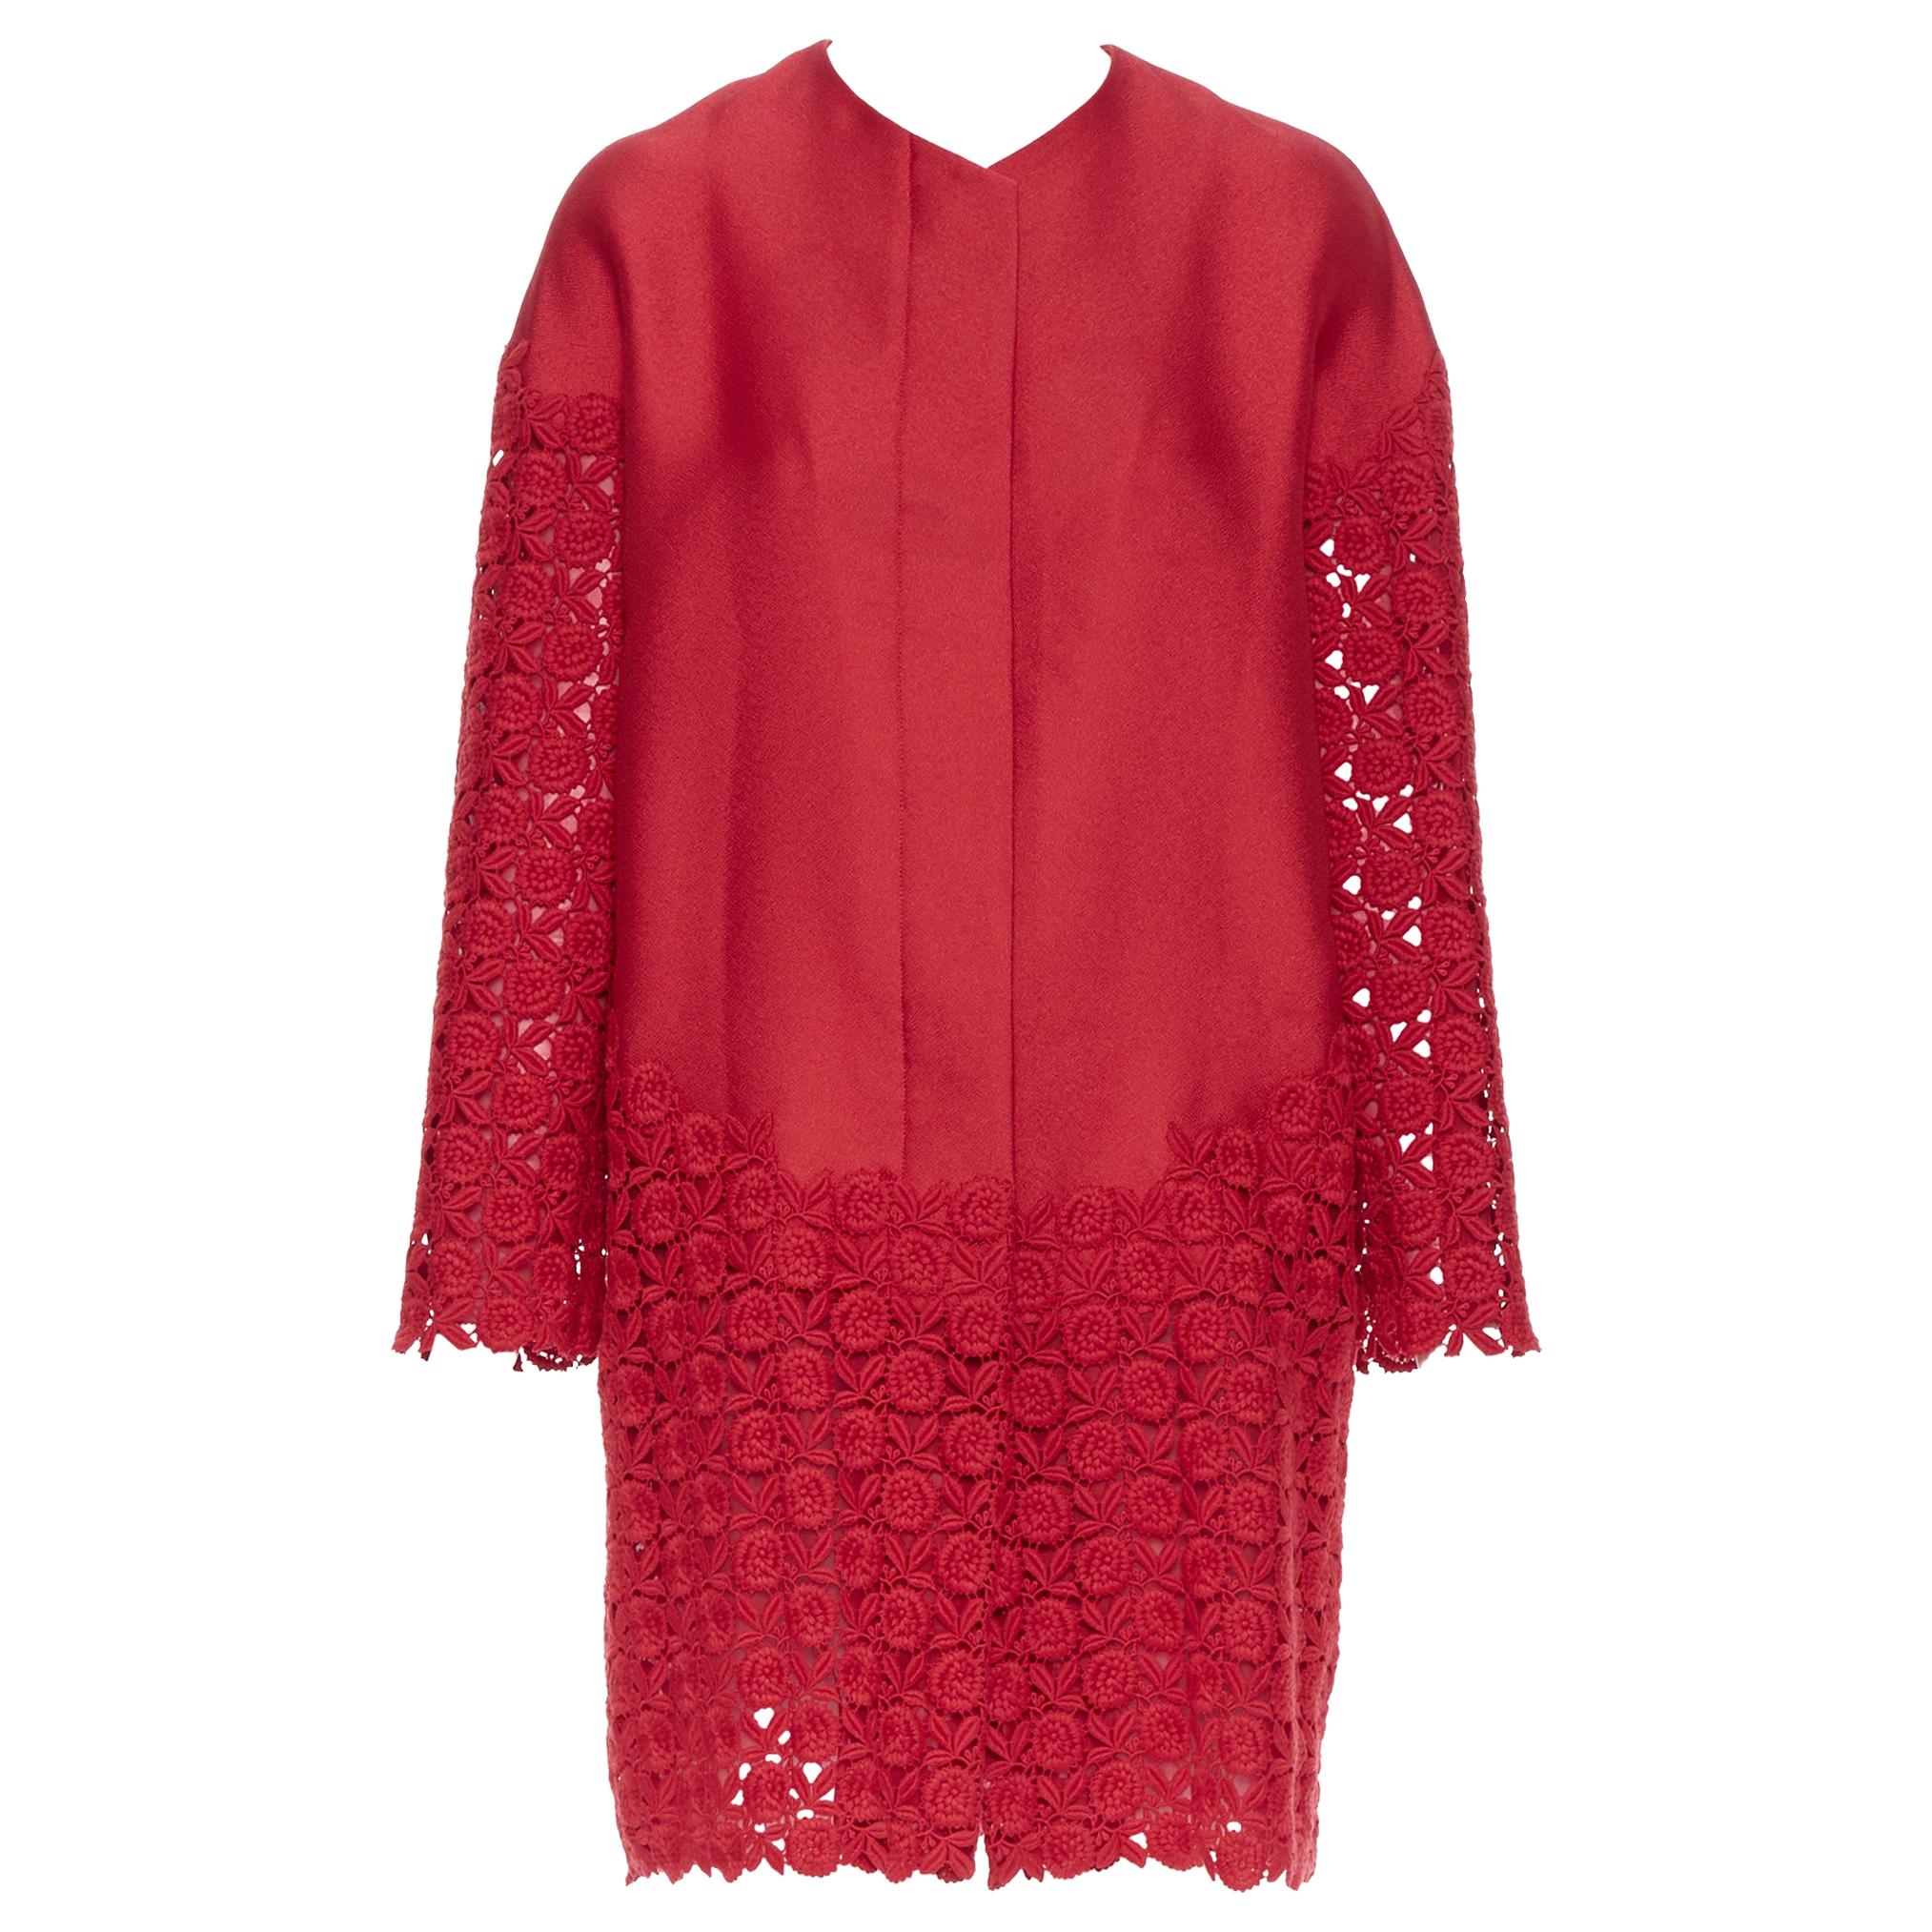 new SHIATZY CHEN red silk crepe floral embroidered lace sleeve cocoon coat FR36